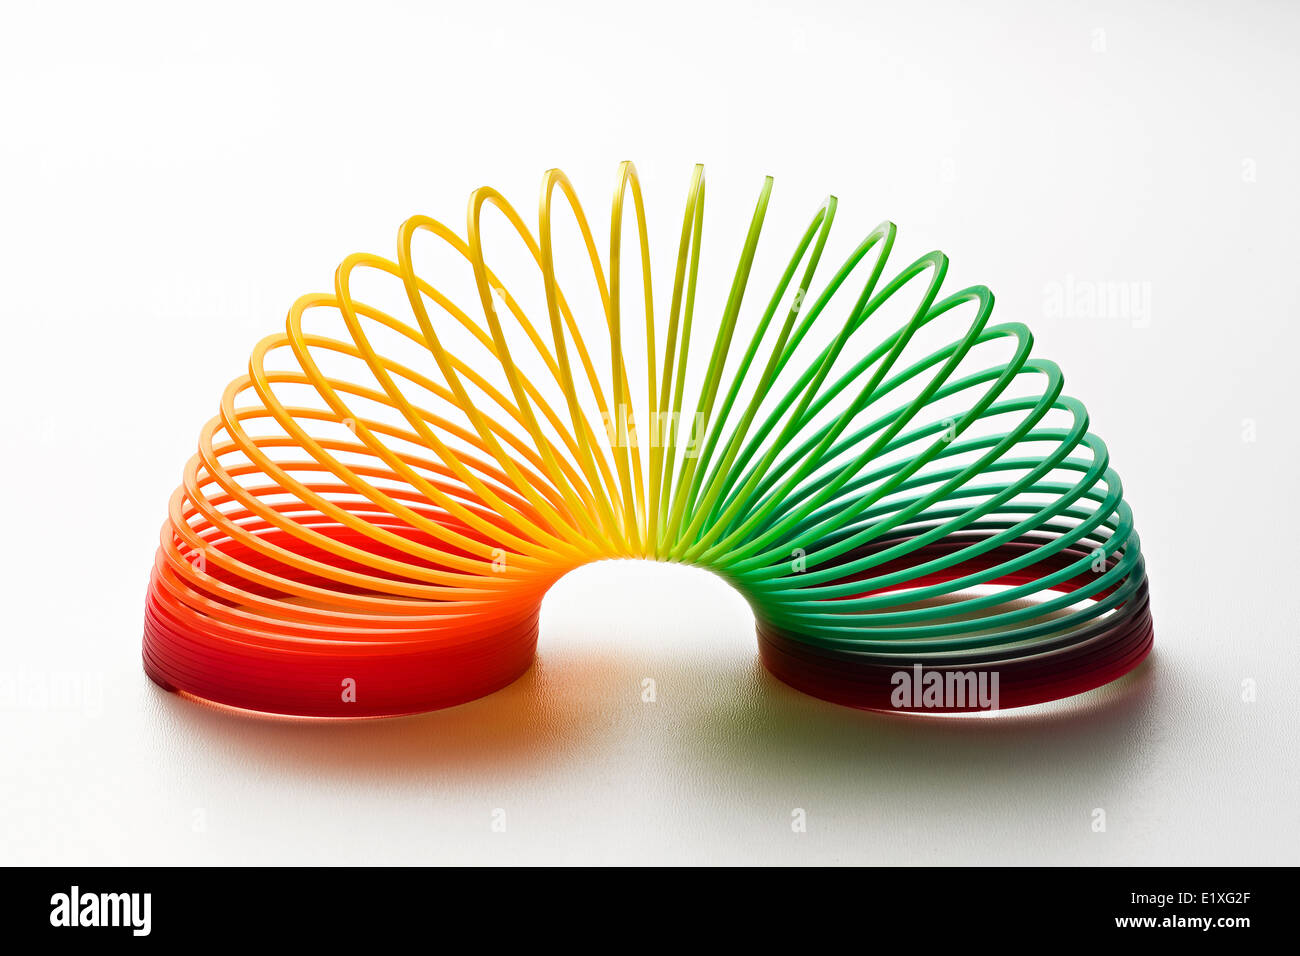 Rainbow colored slinky toy made of a plastic wire spiral coil which enables flexibility and mobility Stock Photo